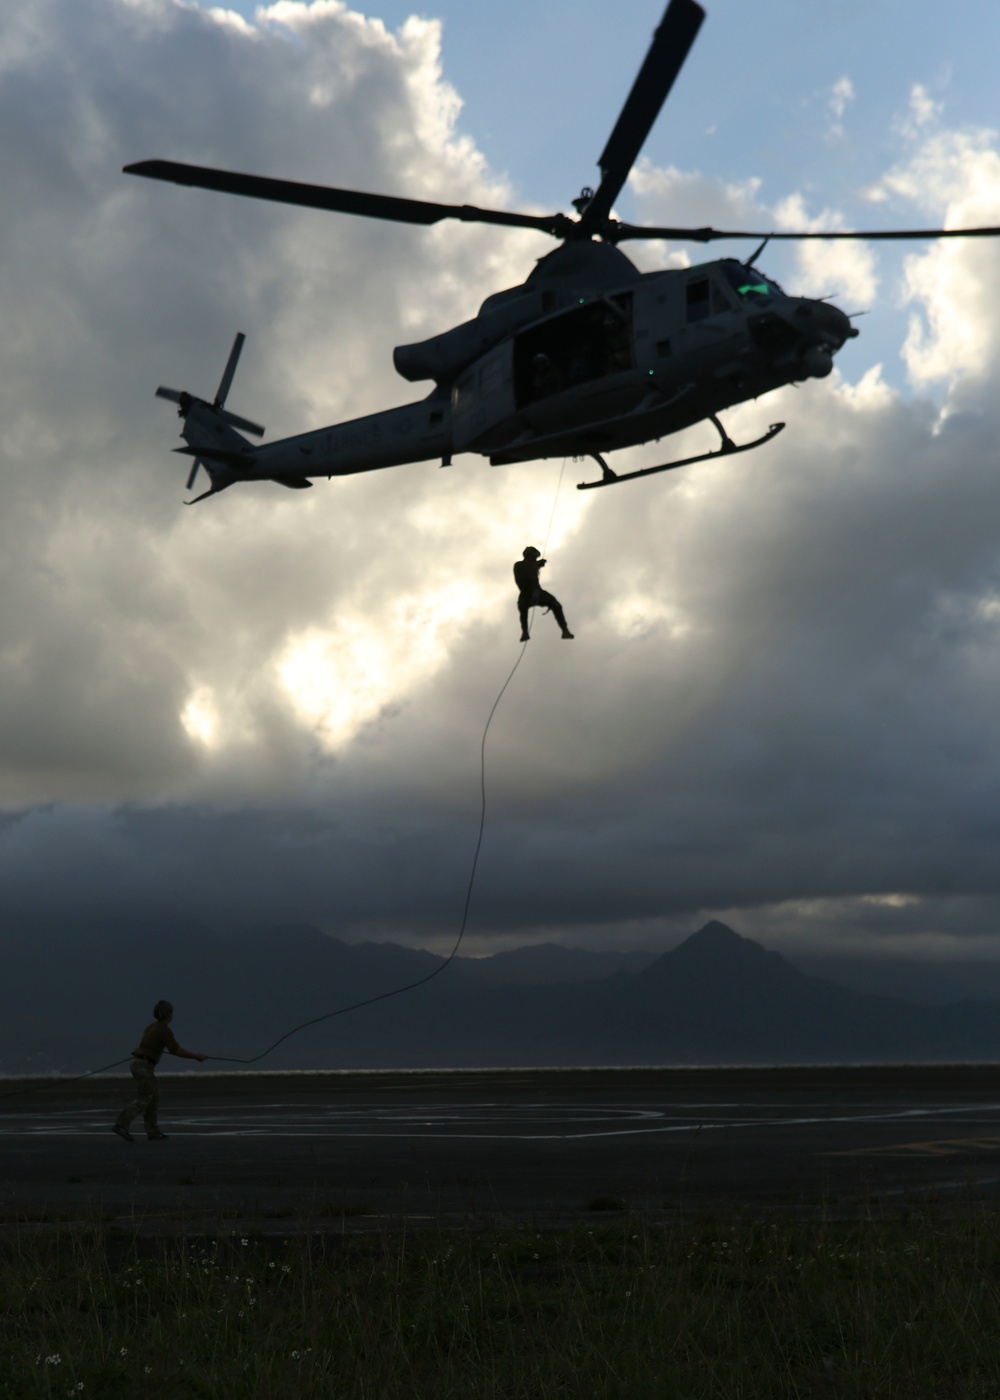 HMLA-367 conduct joint operations